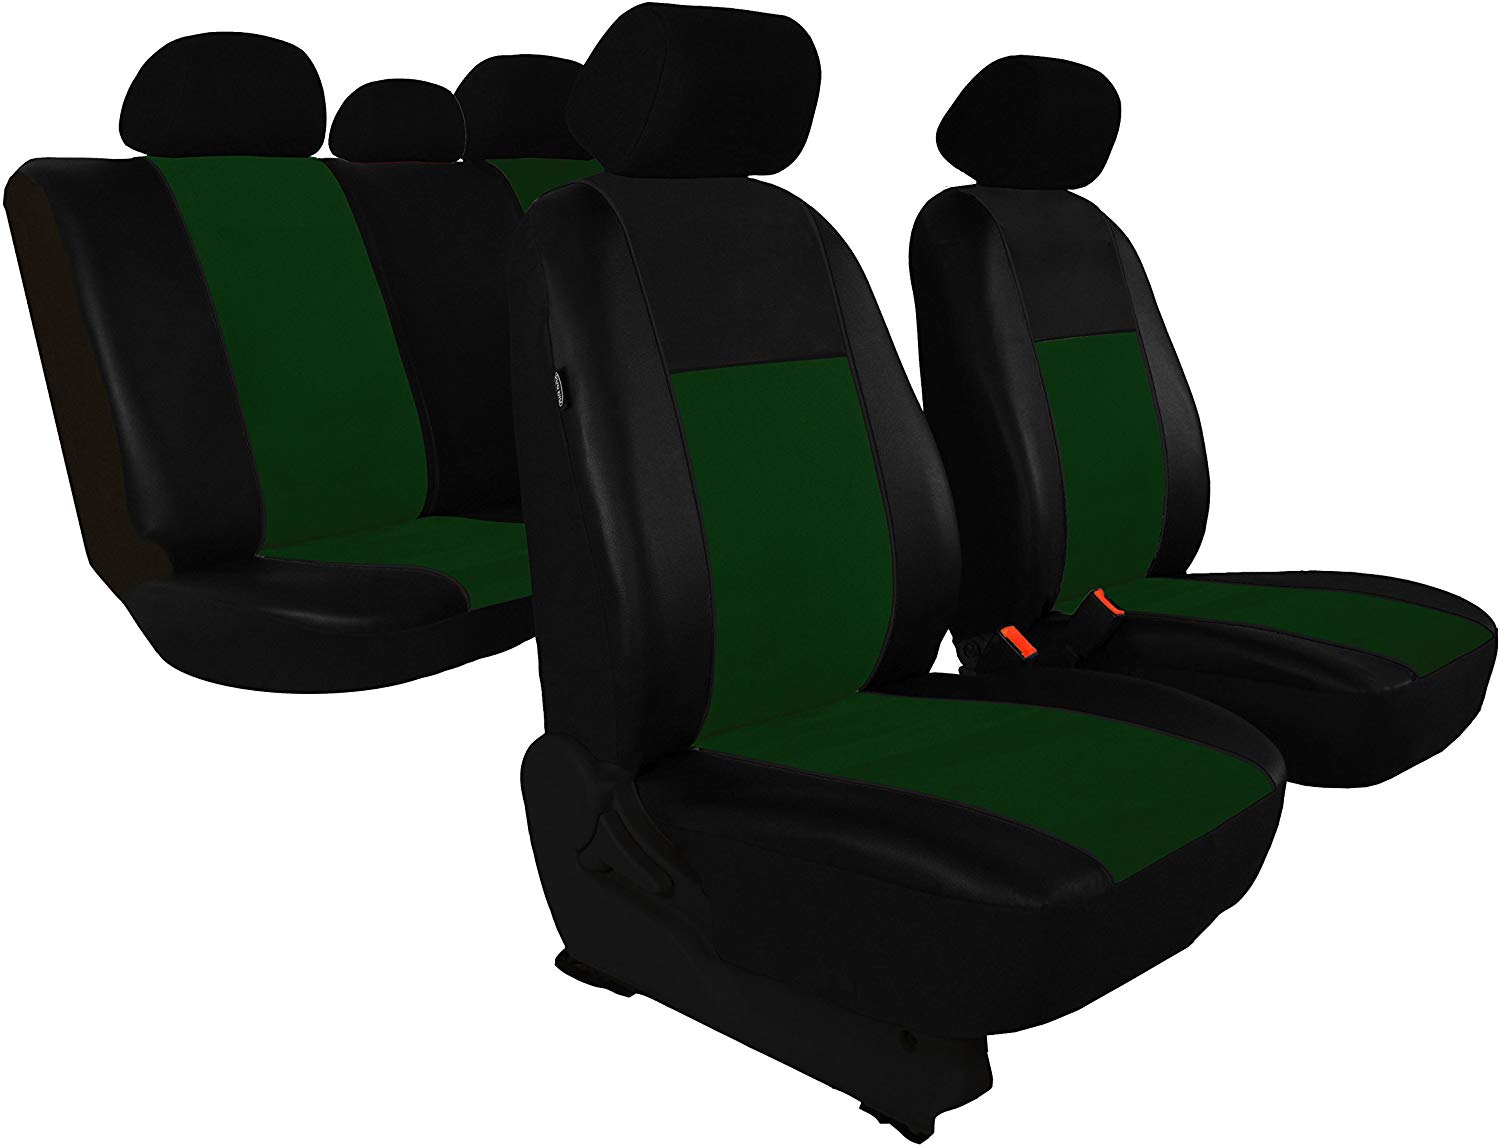 \'CUSTOMISED Car Seat Cover Set for Tiguan II 2016 from Unico. Colour green.